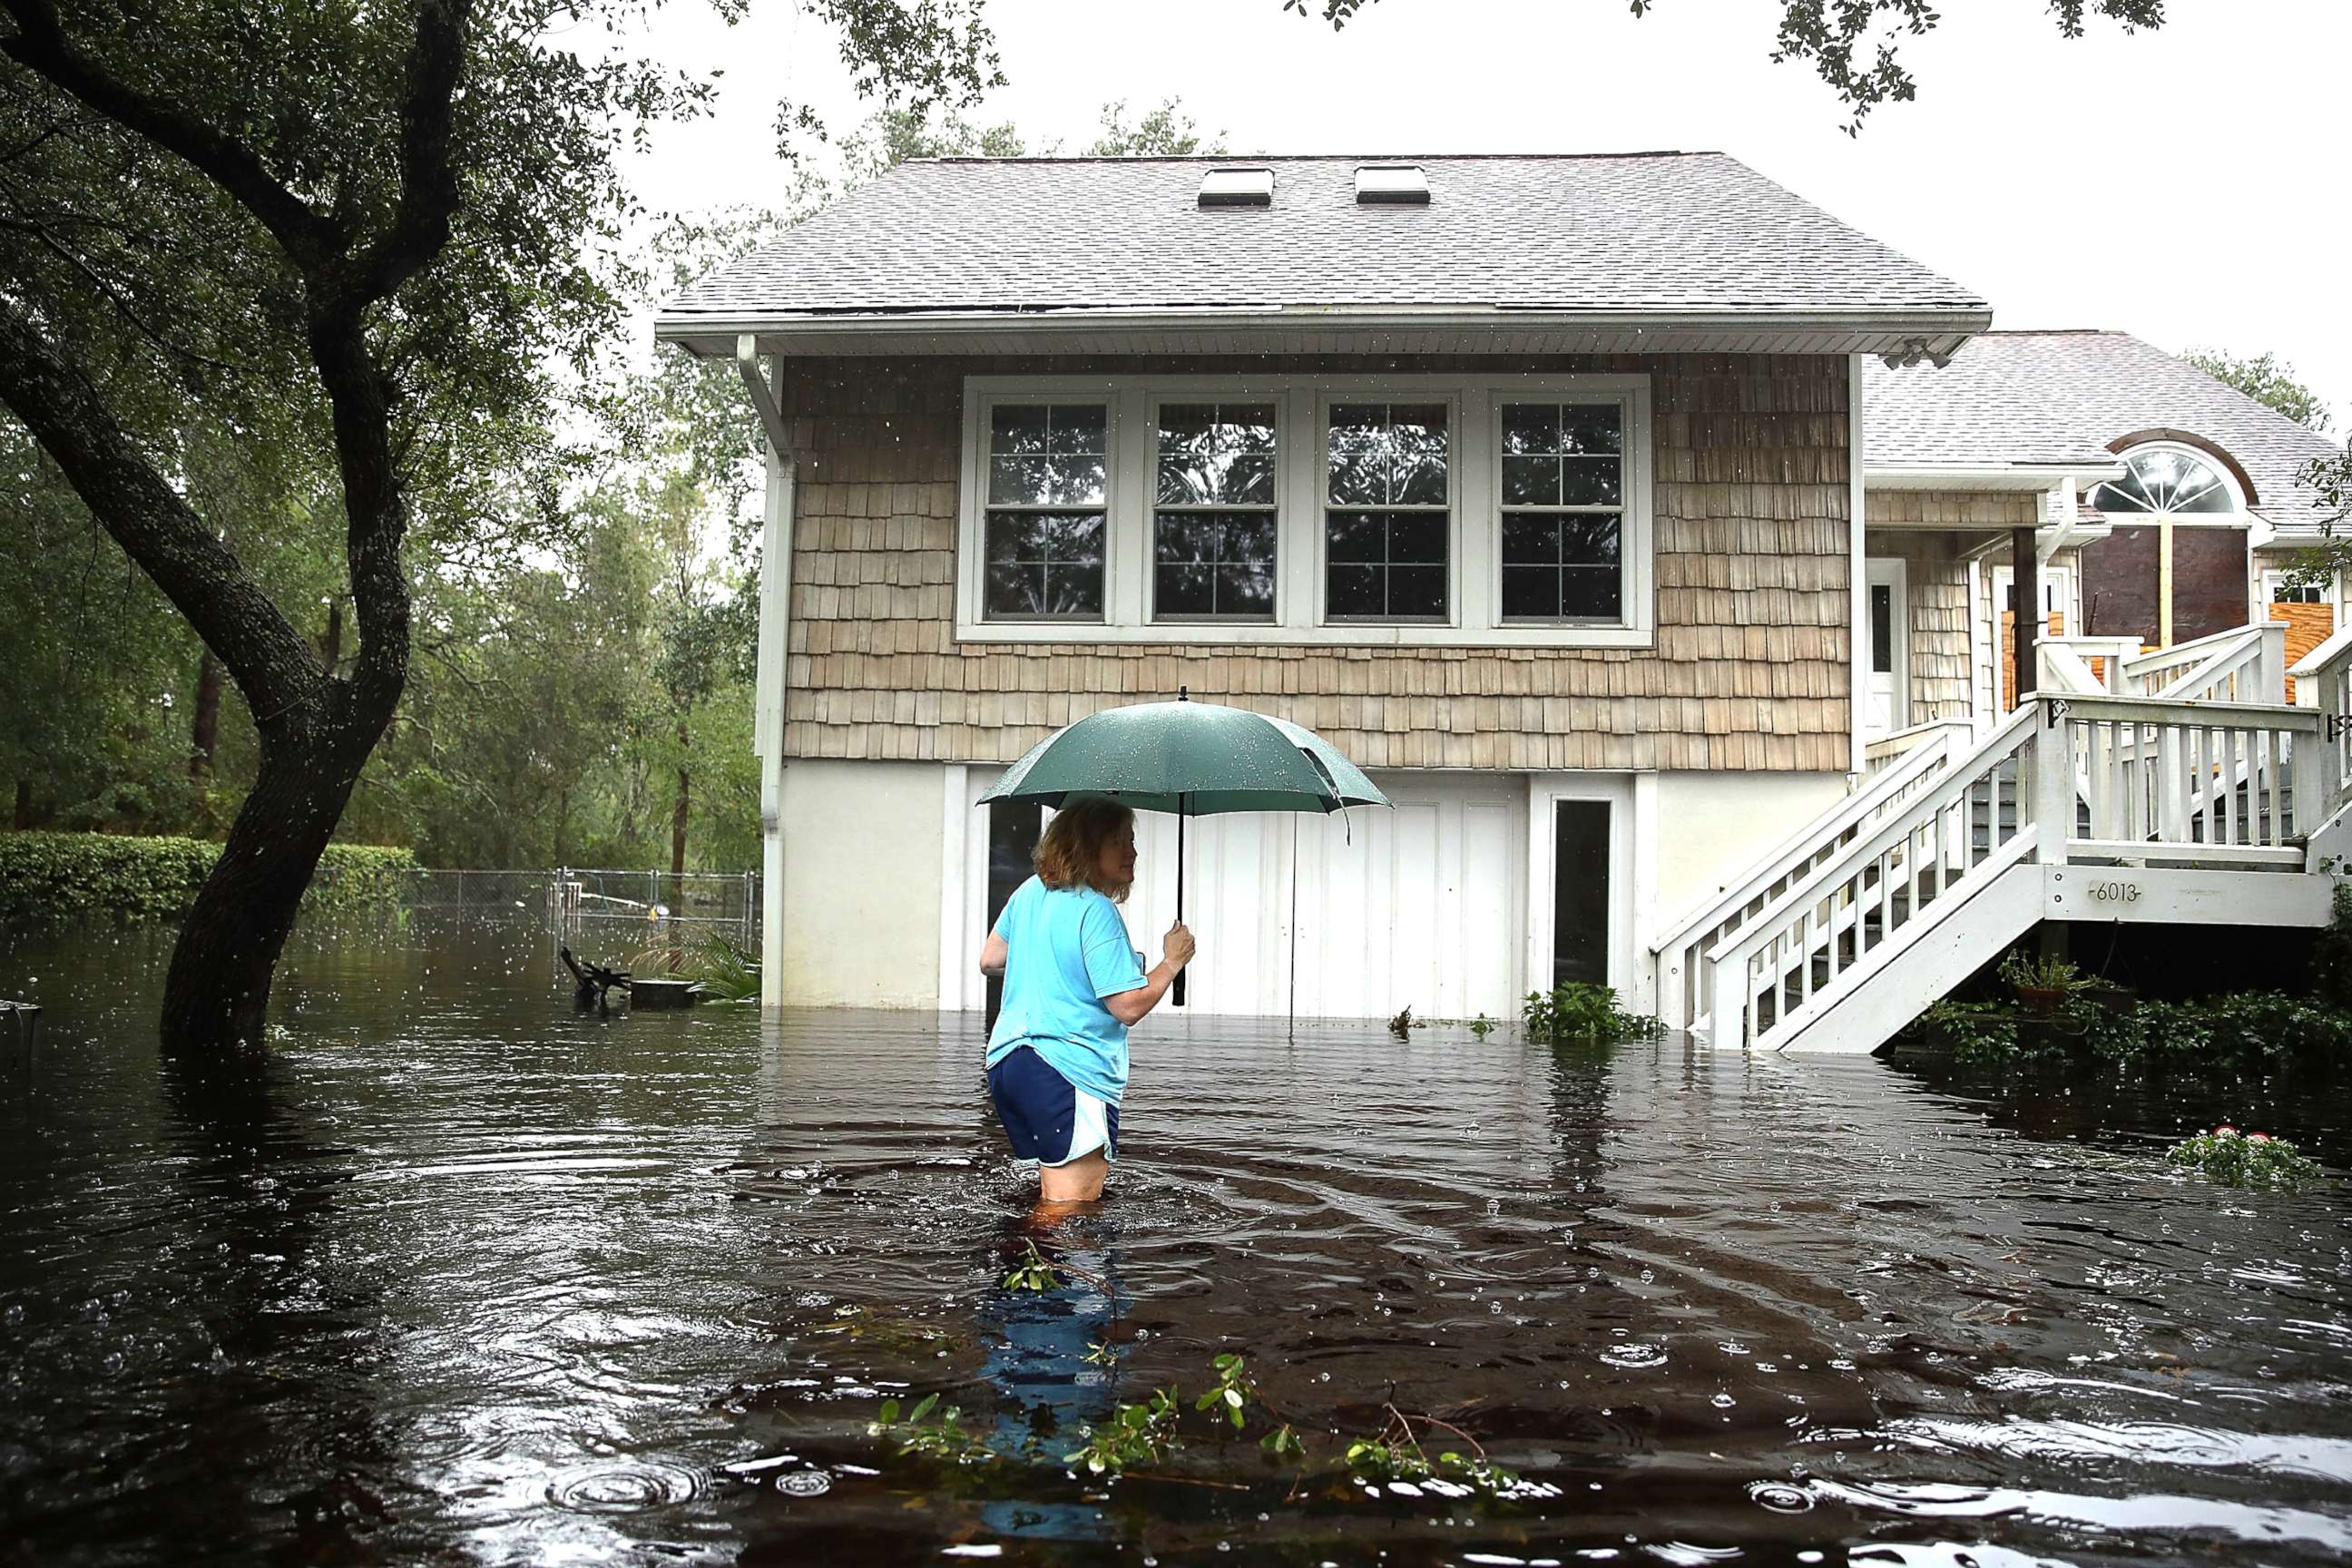 PHOTO: A woman makes her way to her home that is surrounded by flood waters after Hurricane Florence passed through the area on Sept. 15, 2018, in Southport, N.C.